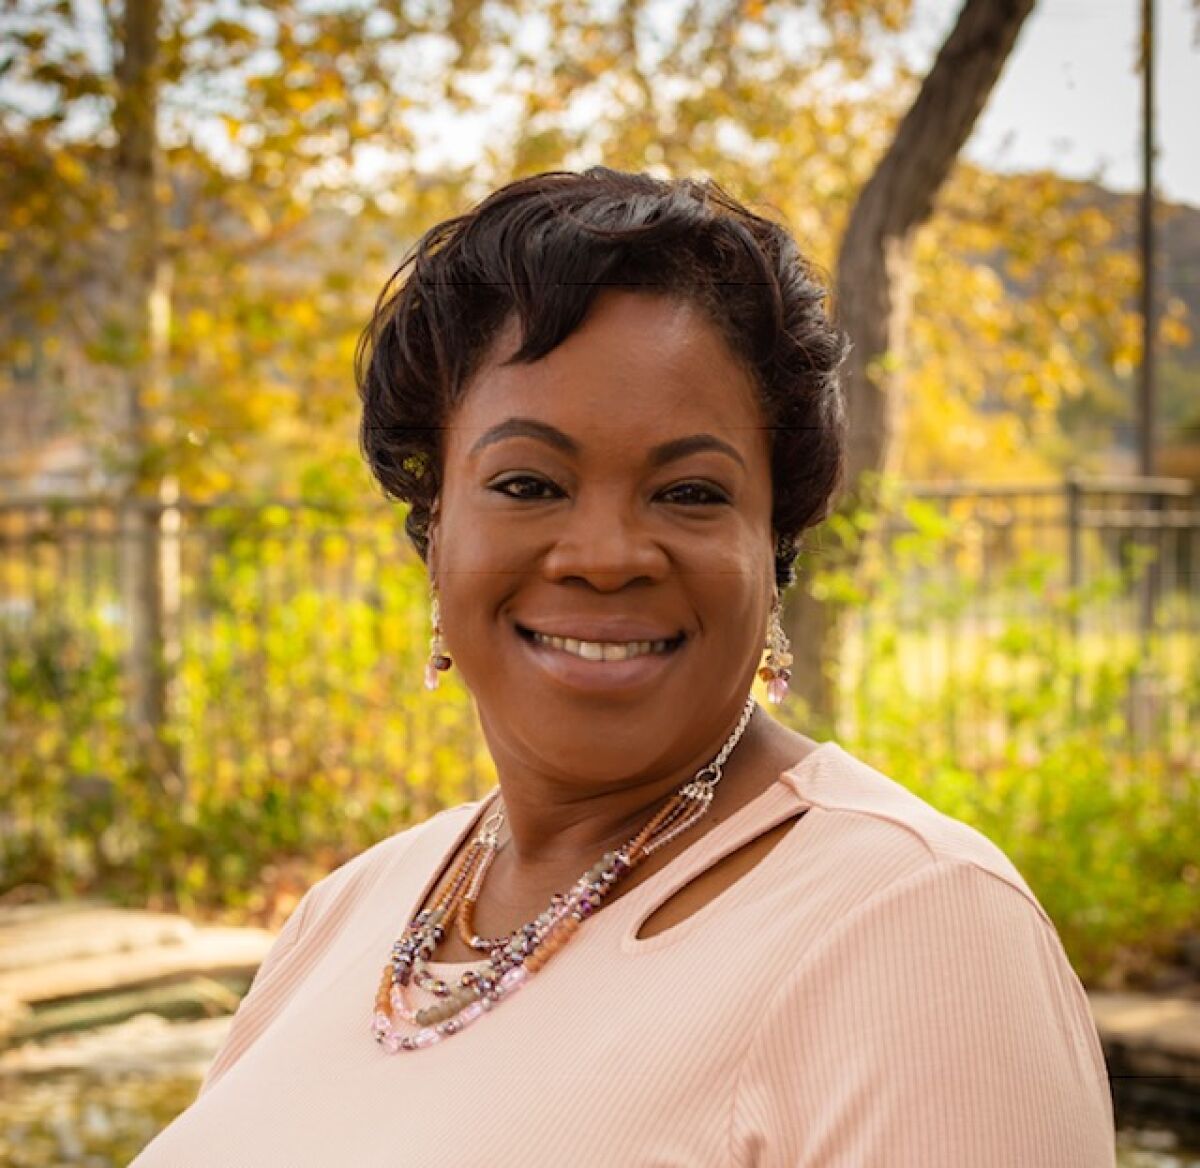 Francine Maxwell, president of the National Association for the Advancement of Colored People San Diego Branch since 2018